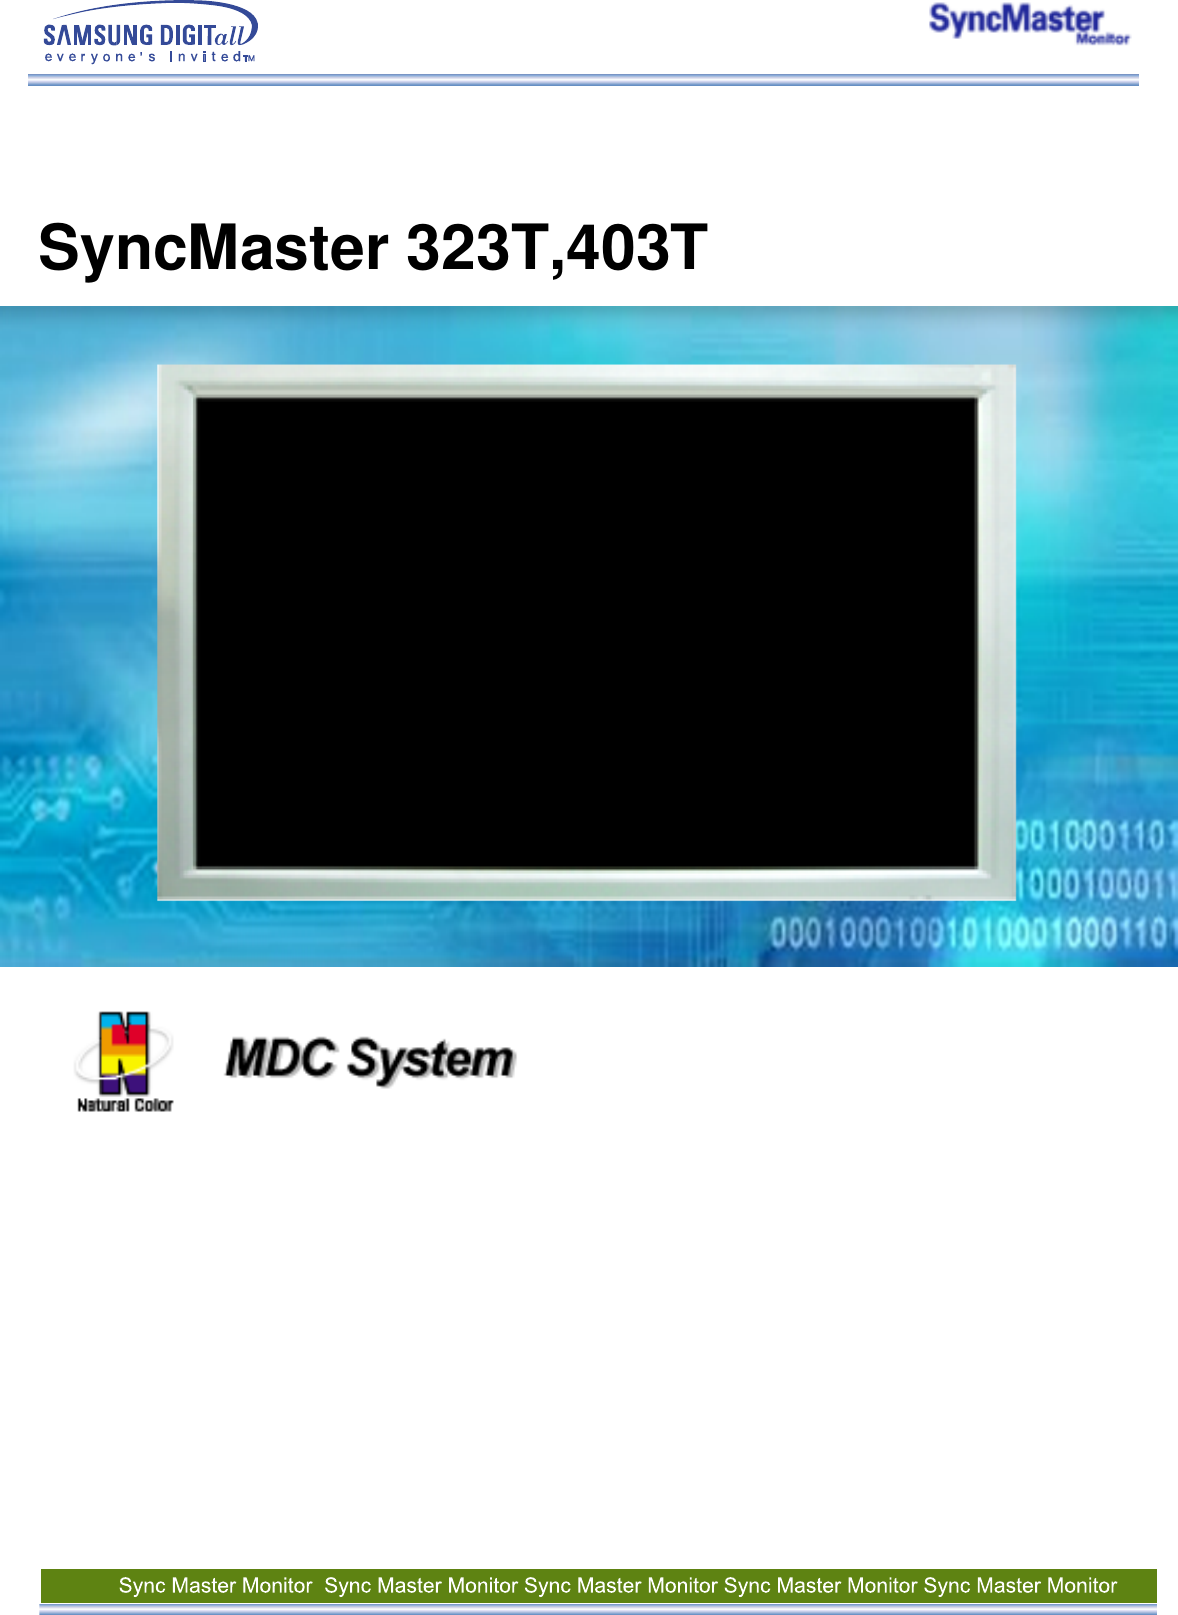  SyncMaster 323T,403T